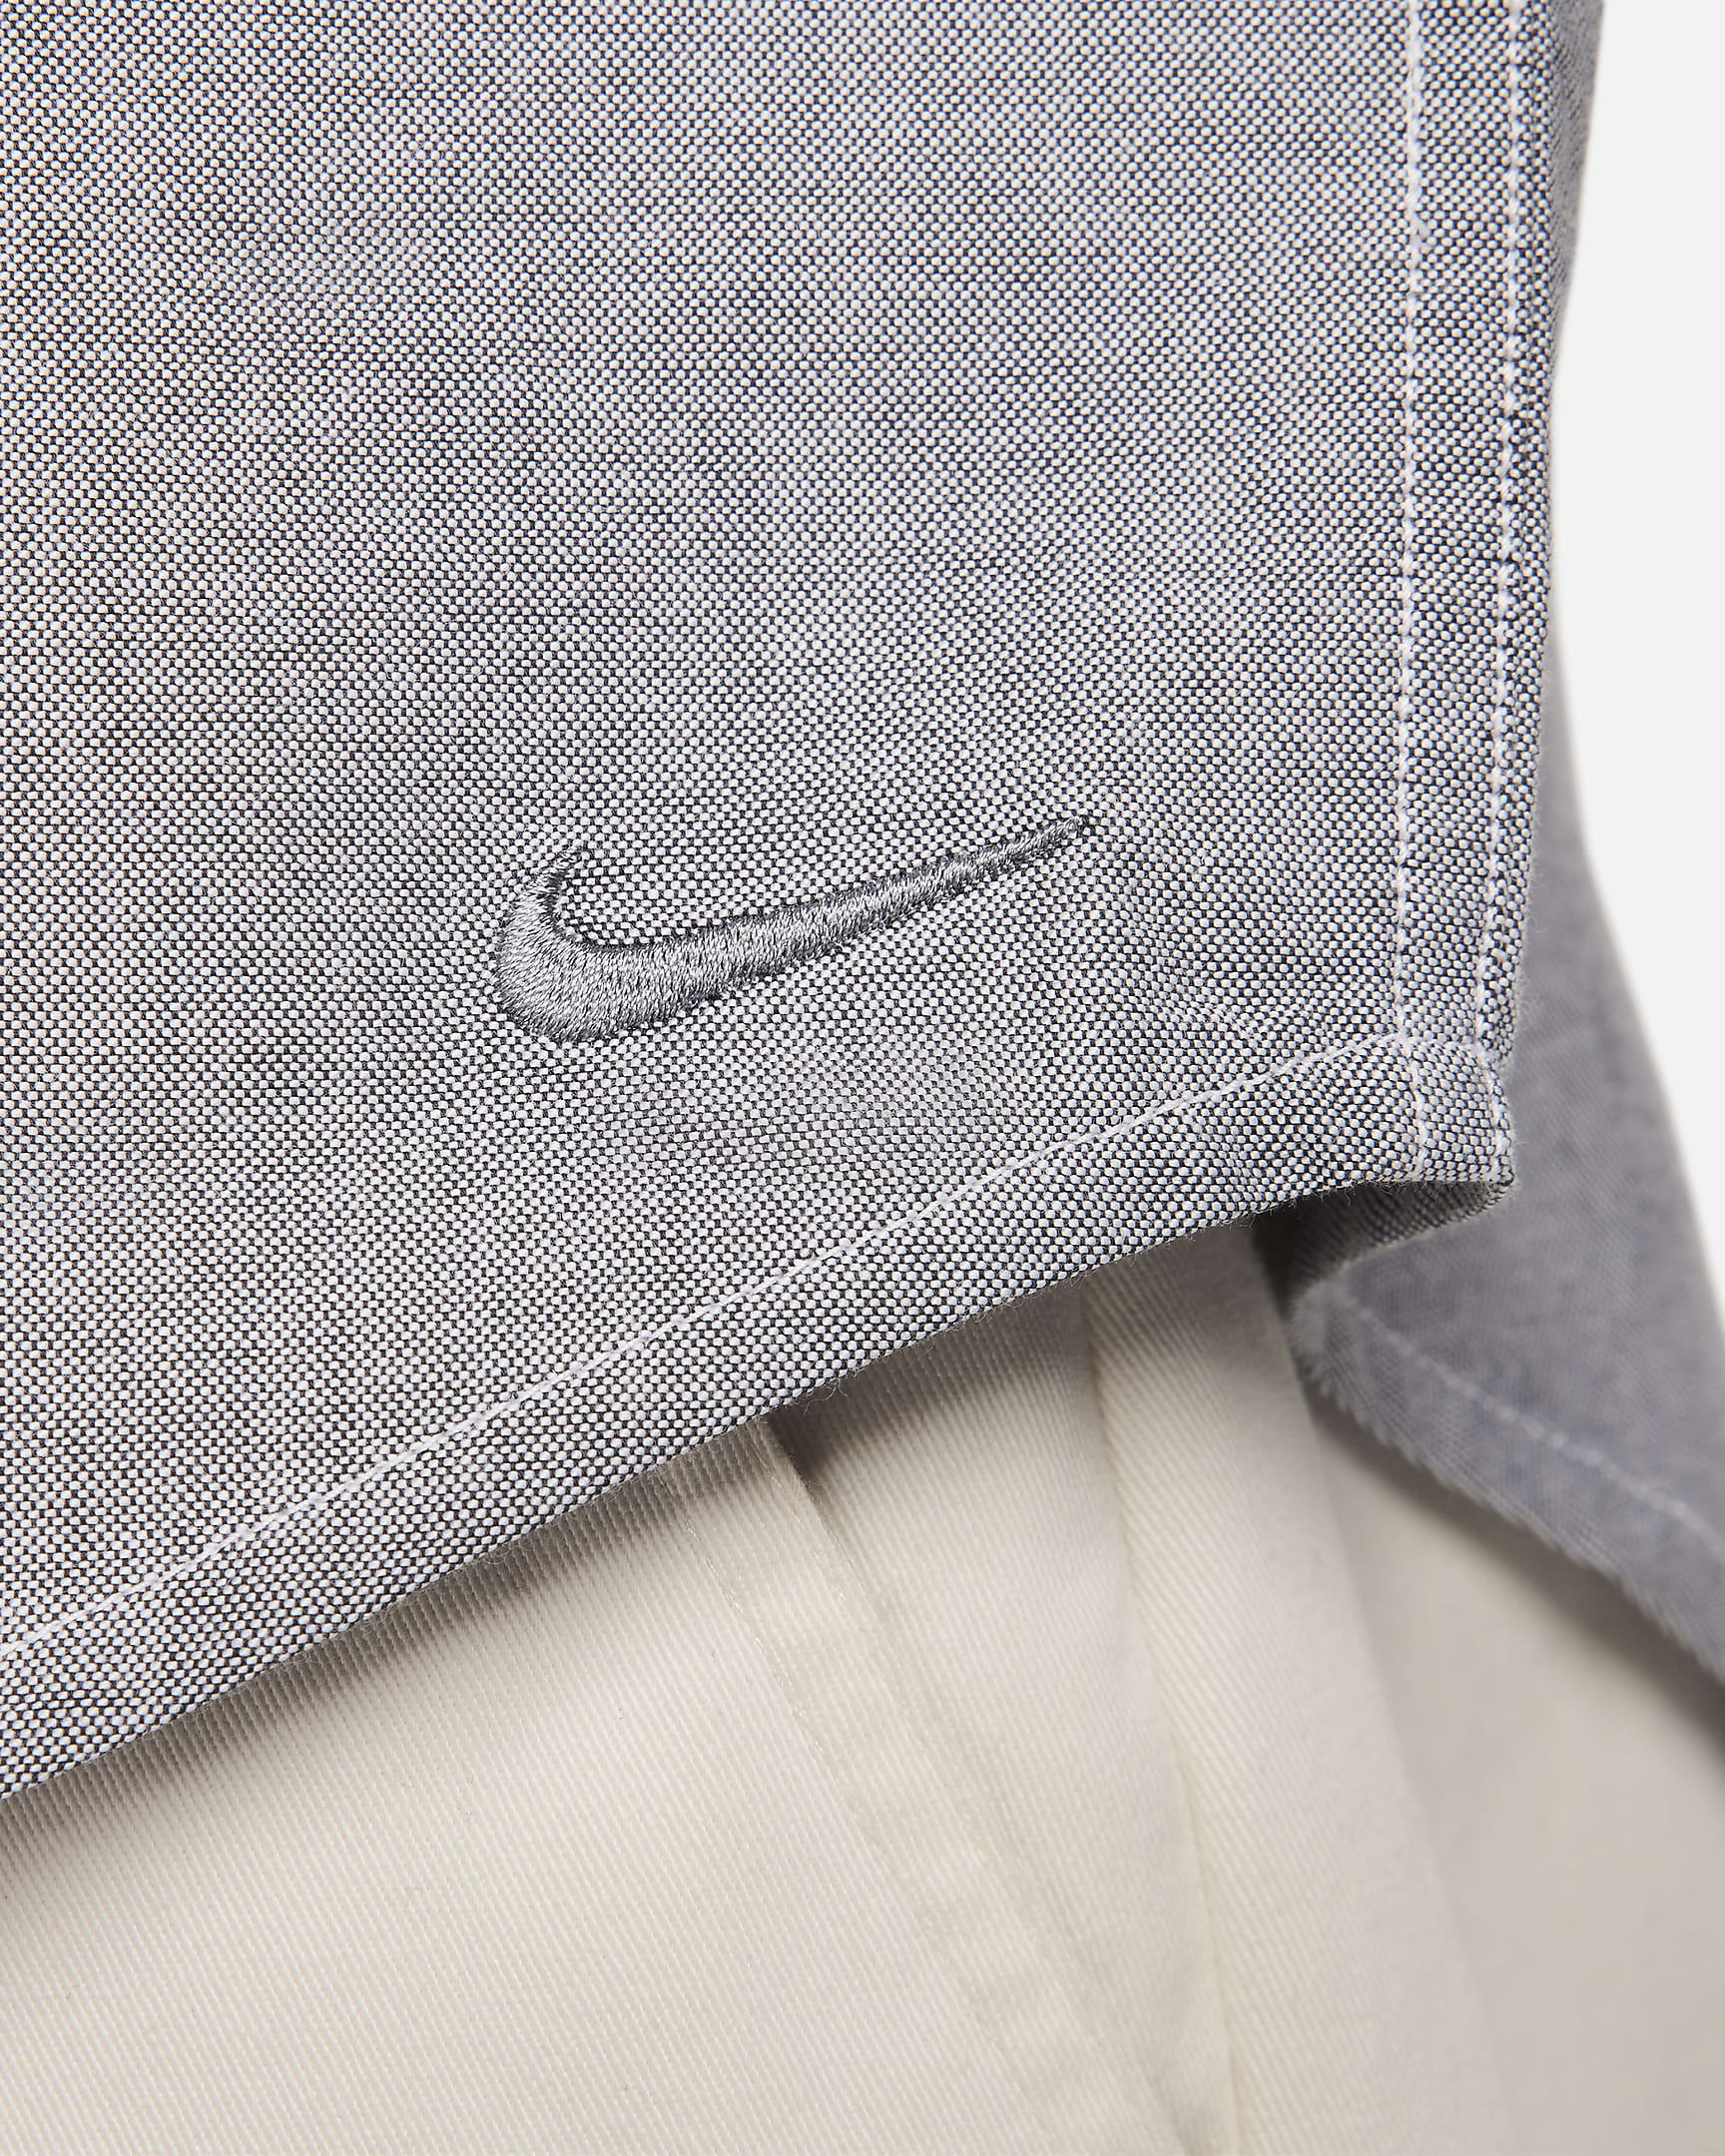 Nike Life Men's Long-Sleeve Oxford Button-Down Shirt - White/Anthracite/Cool Grey